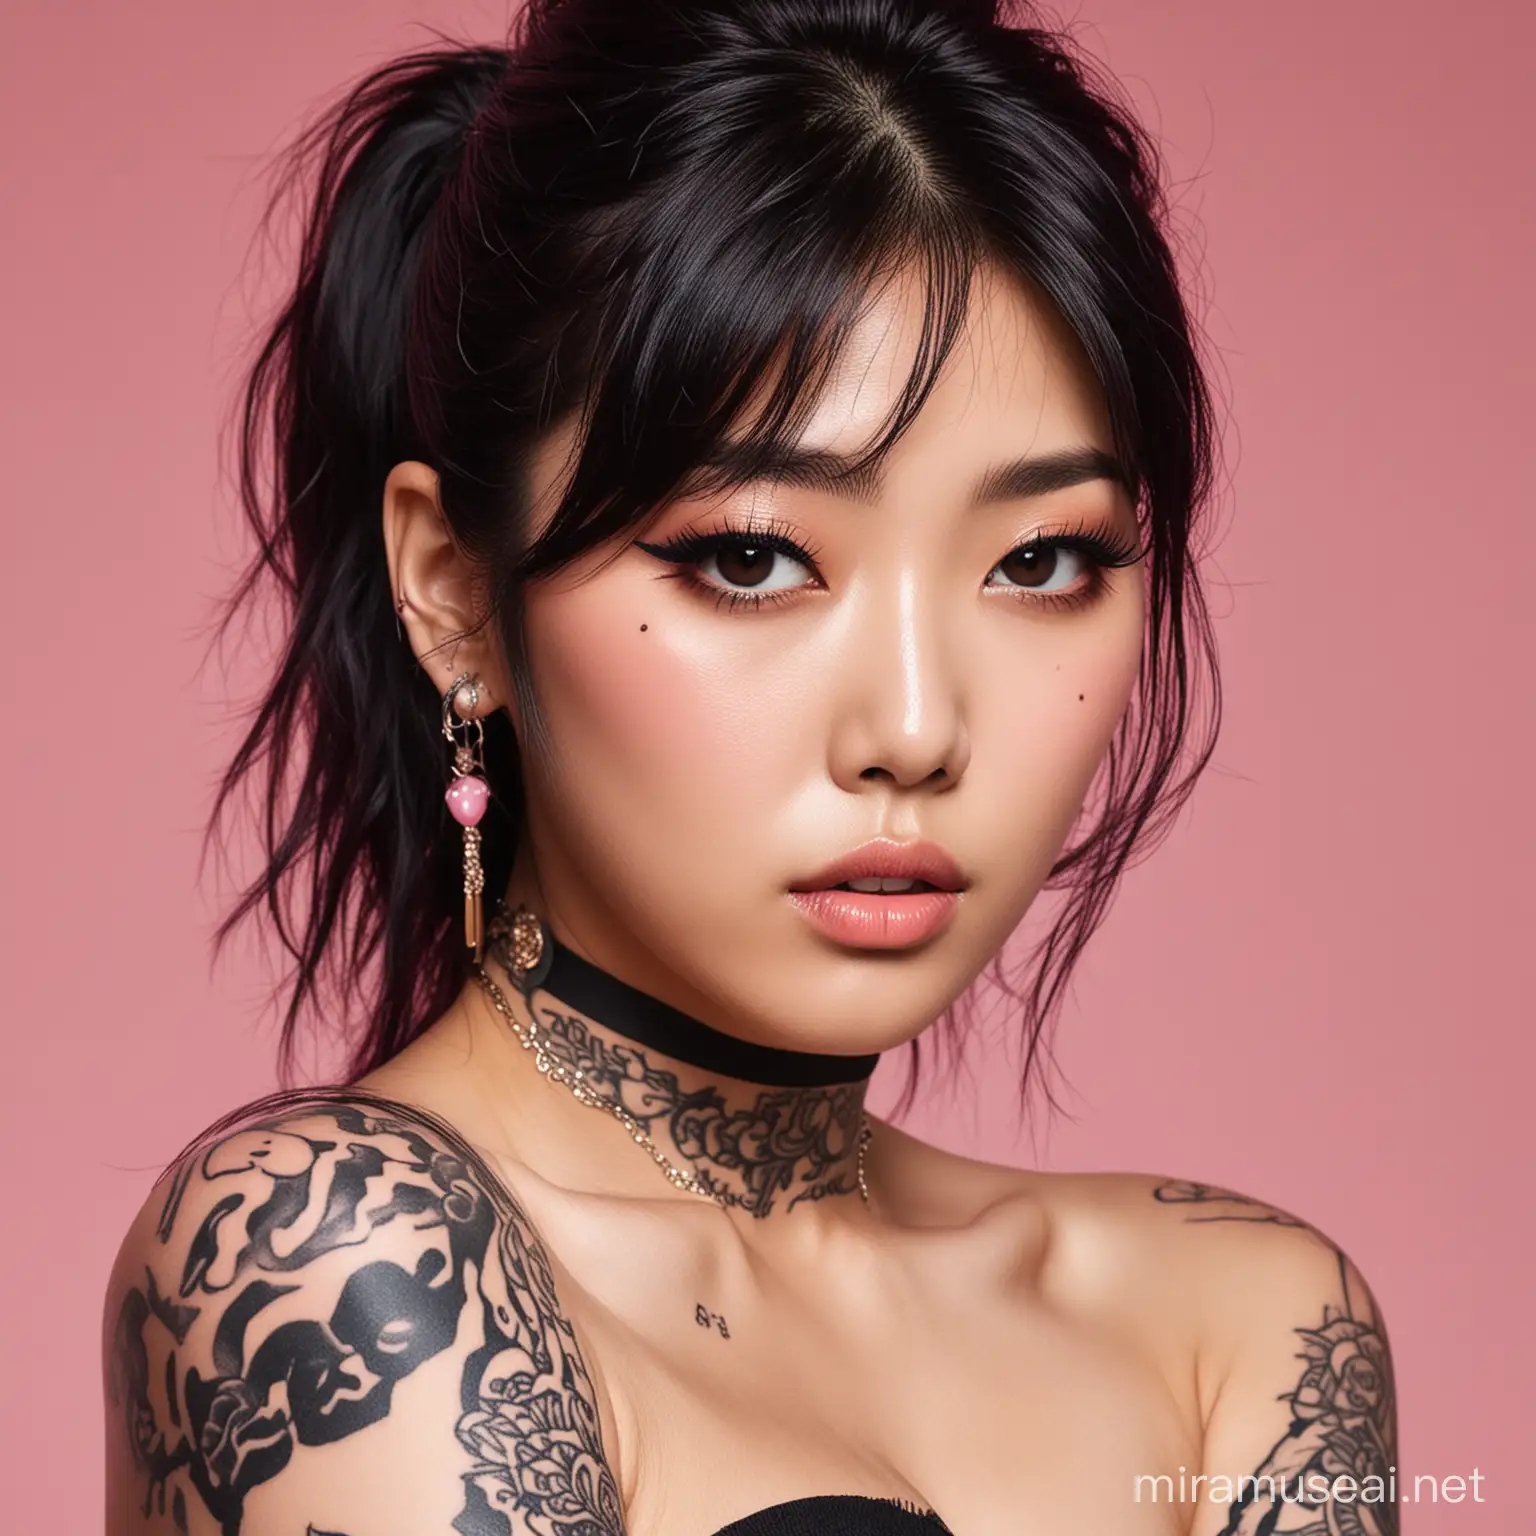 Fierce looking Korean K-pop woman, make it black and pink color themed. She has tattoos. 
